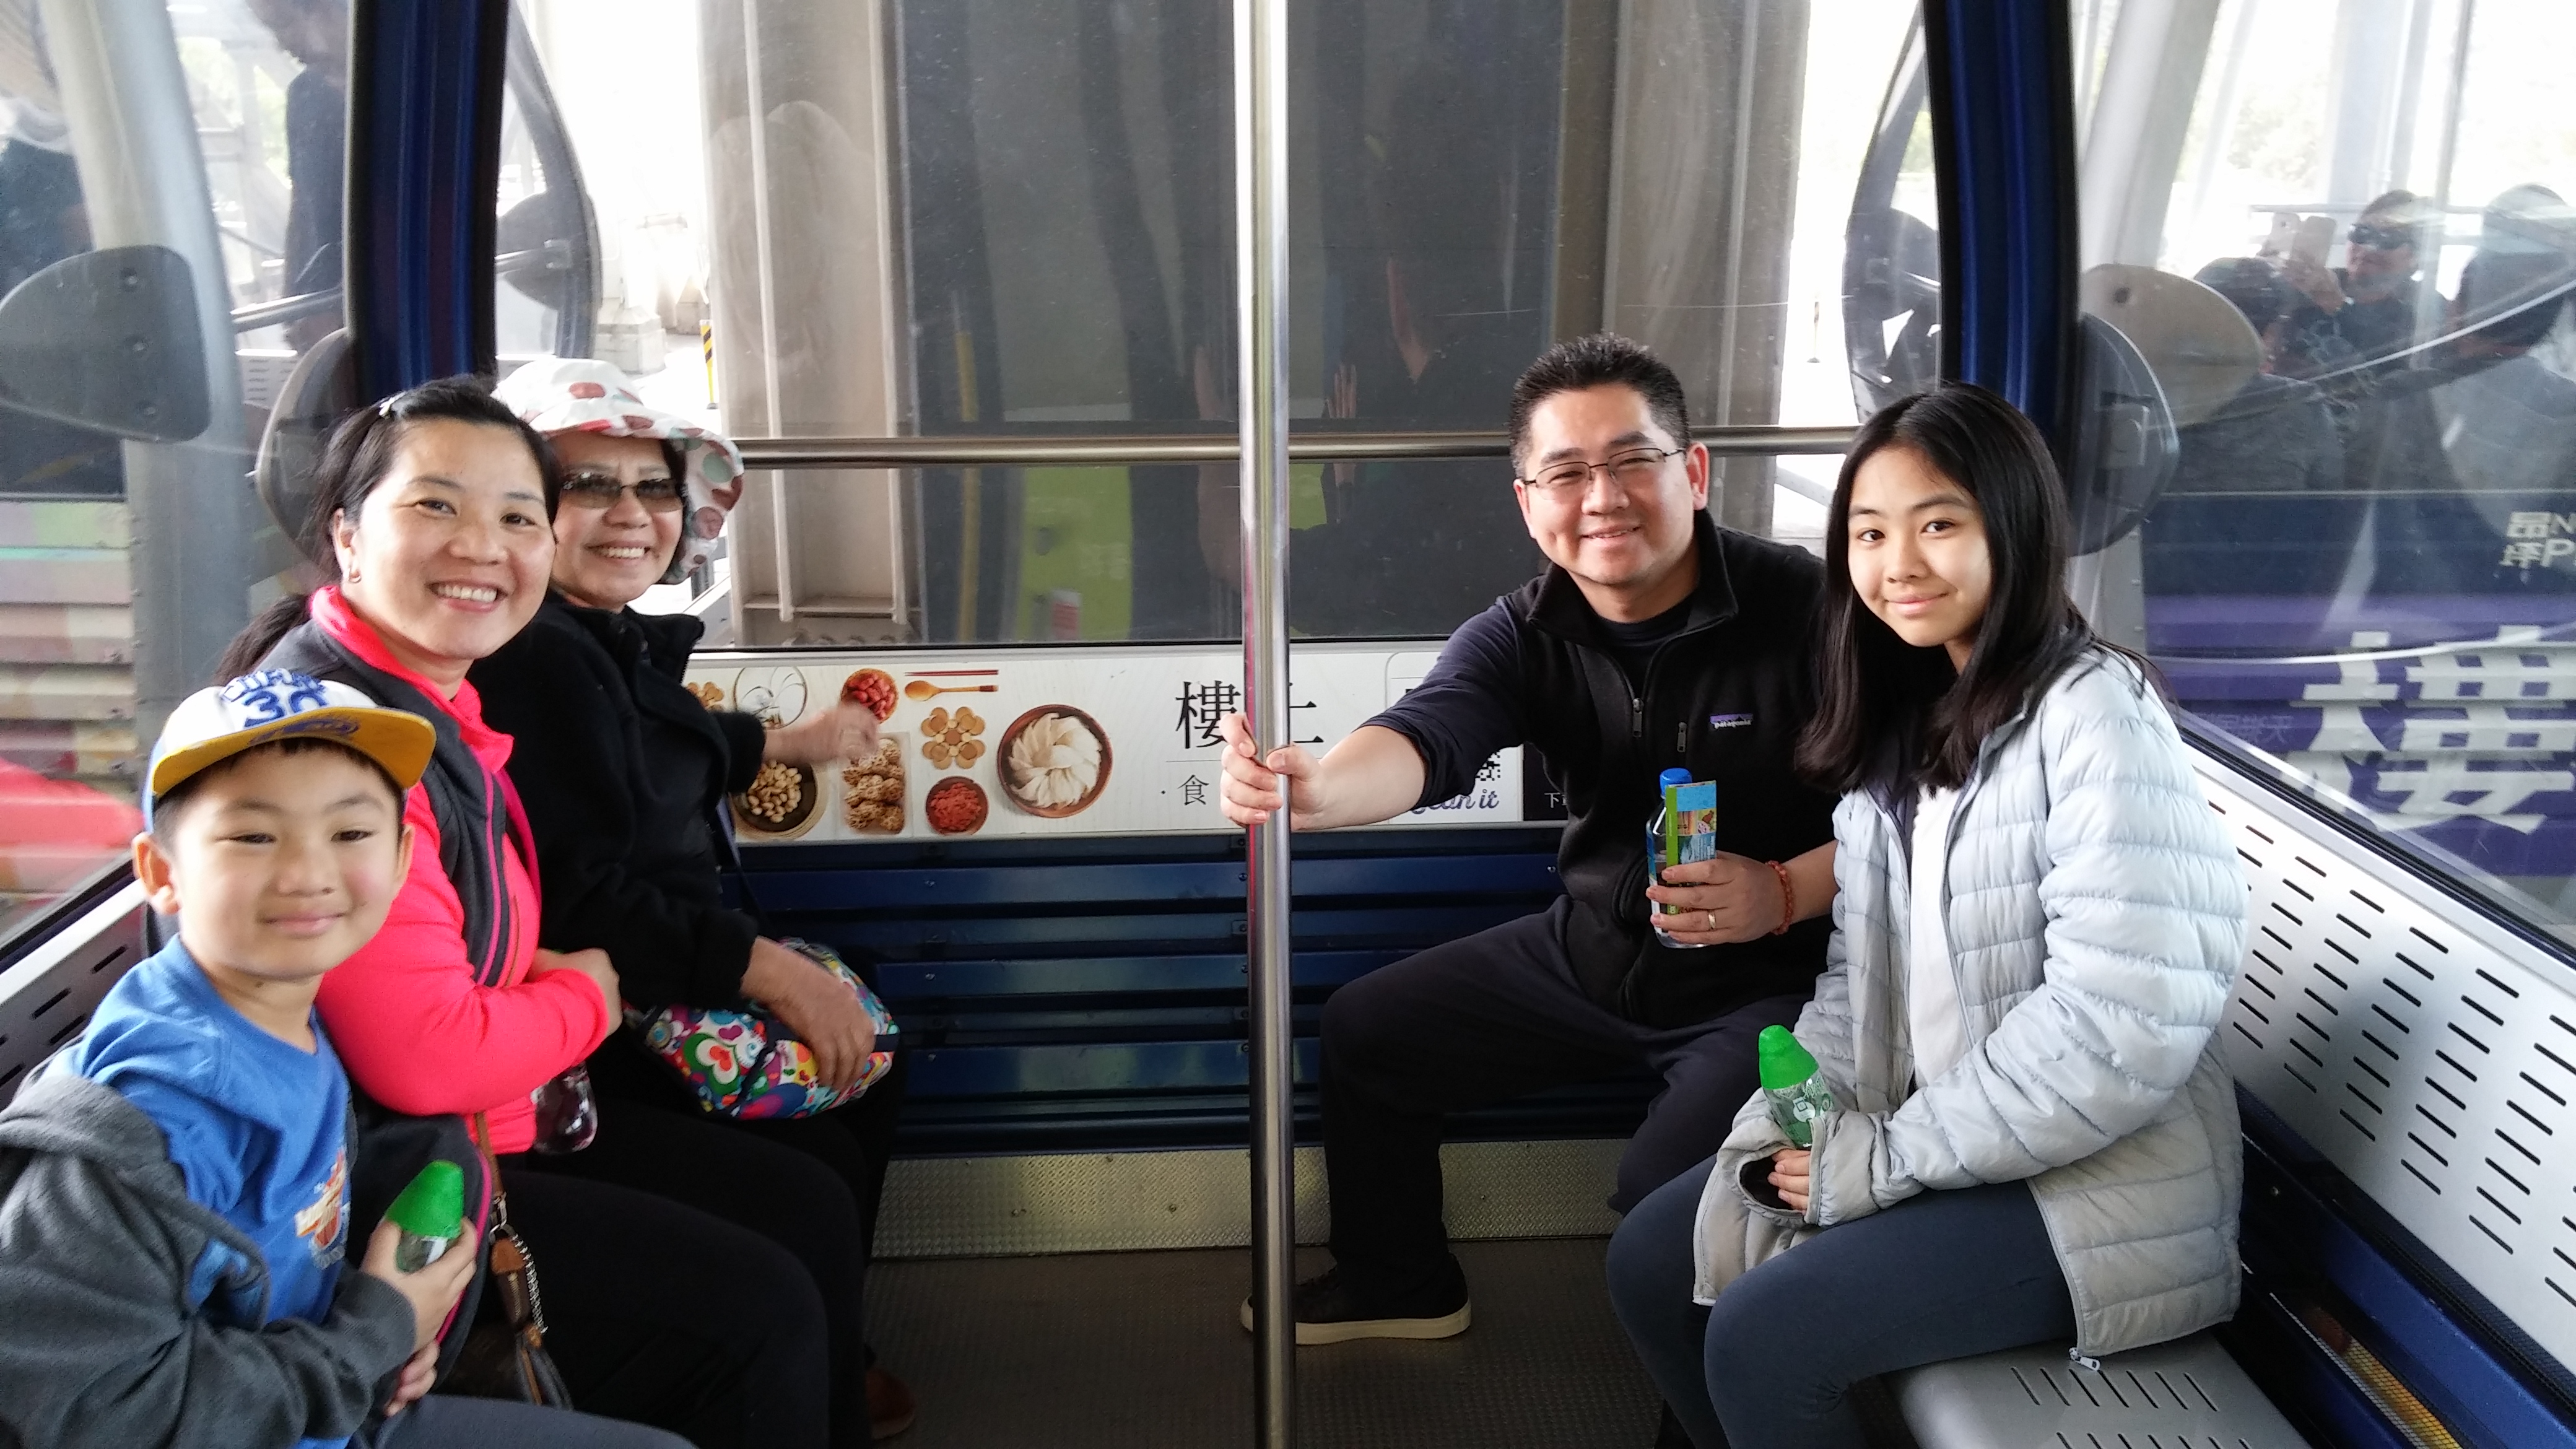 Jeff Chen family taking Ngong Ping Cable Car